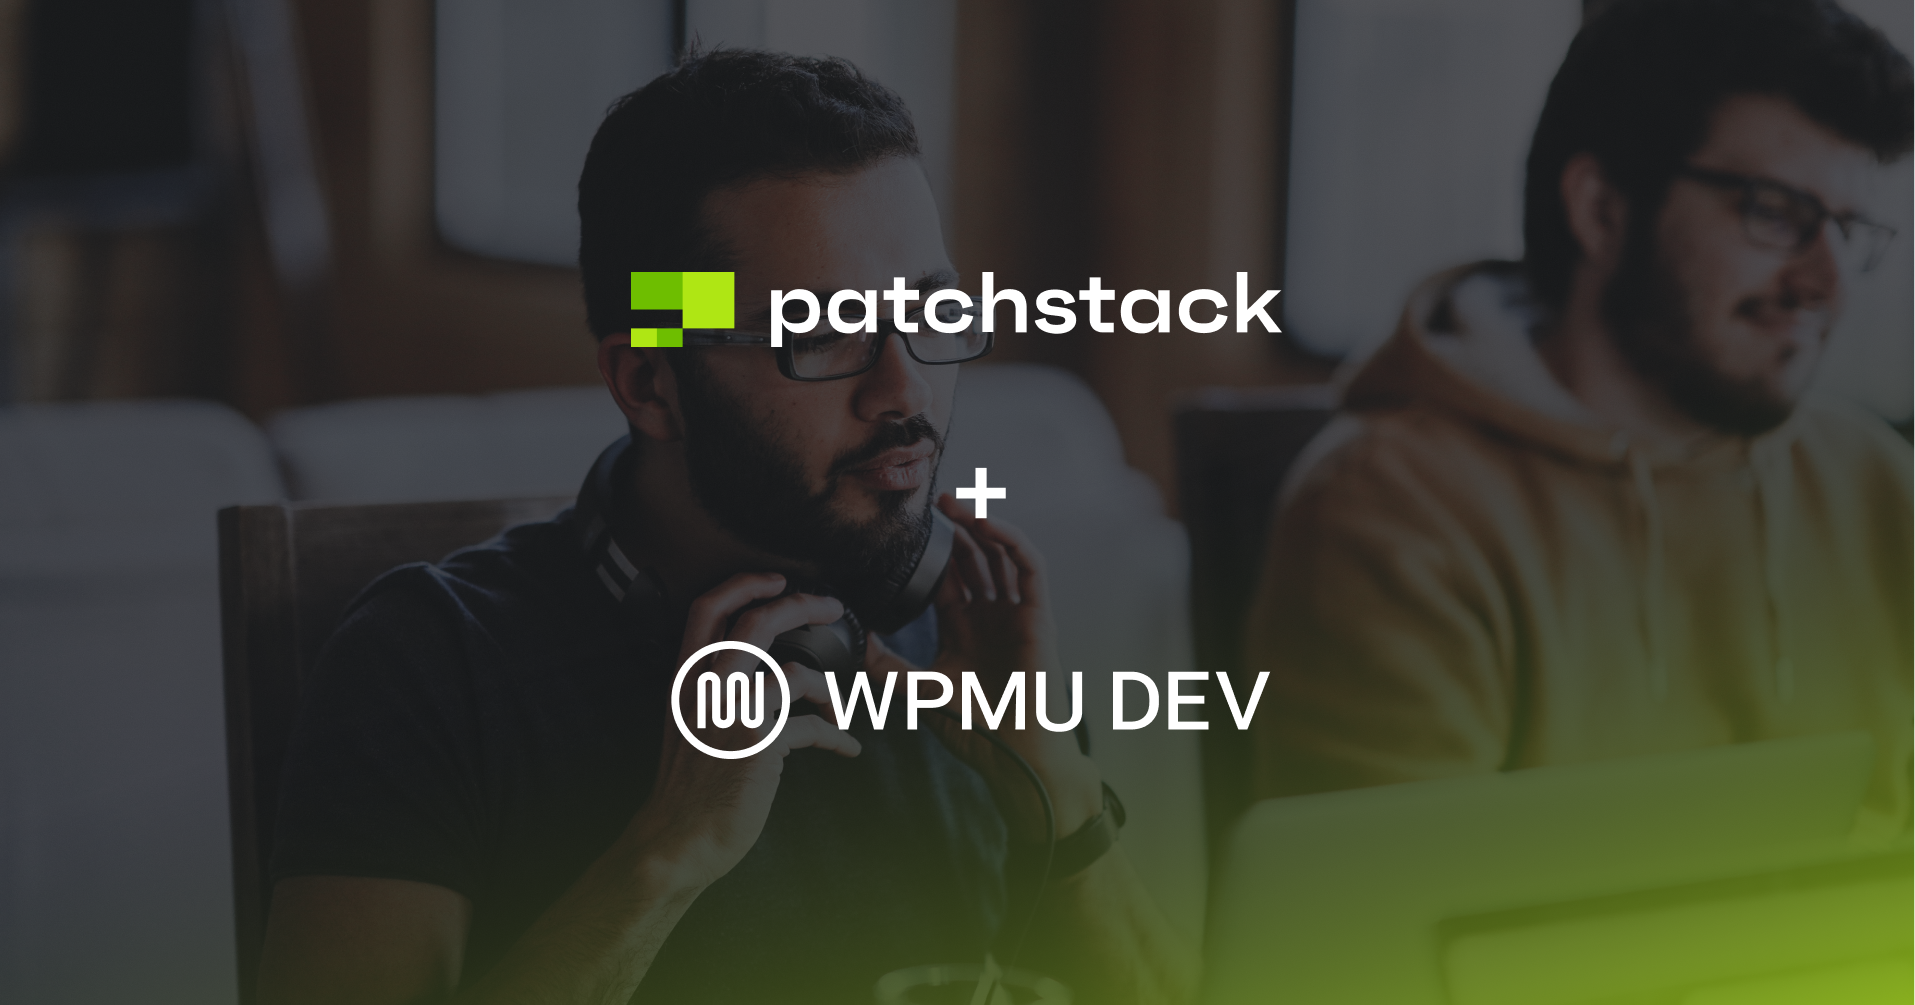 WPMU DEV's Defender Pro is powered by Patchstack's vulnerability feed